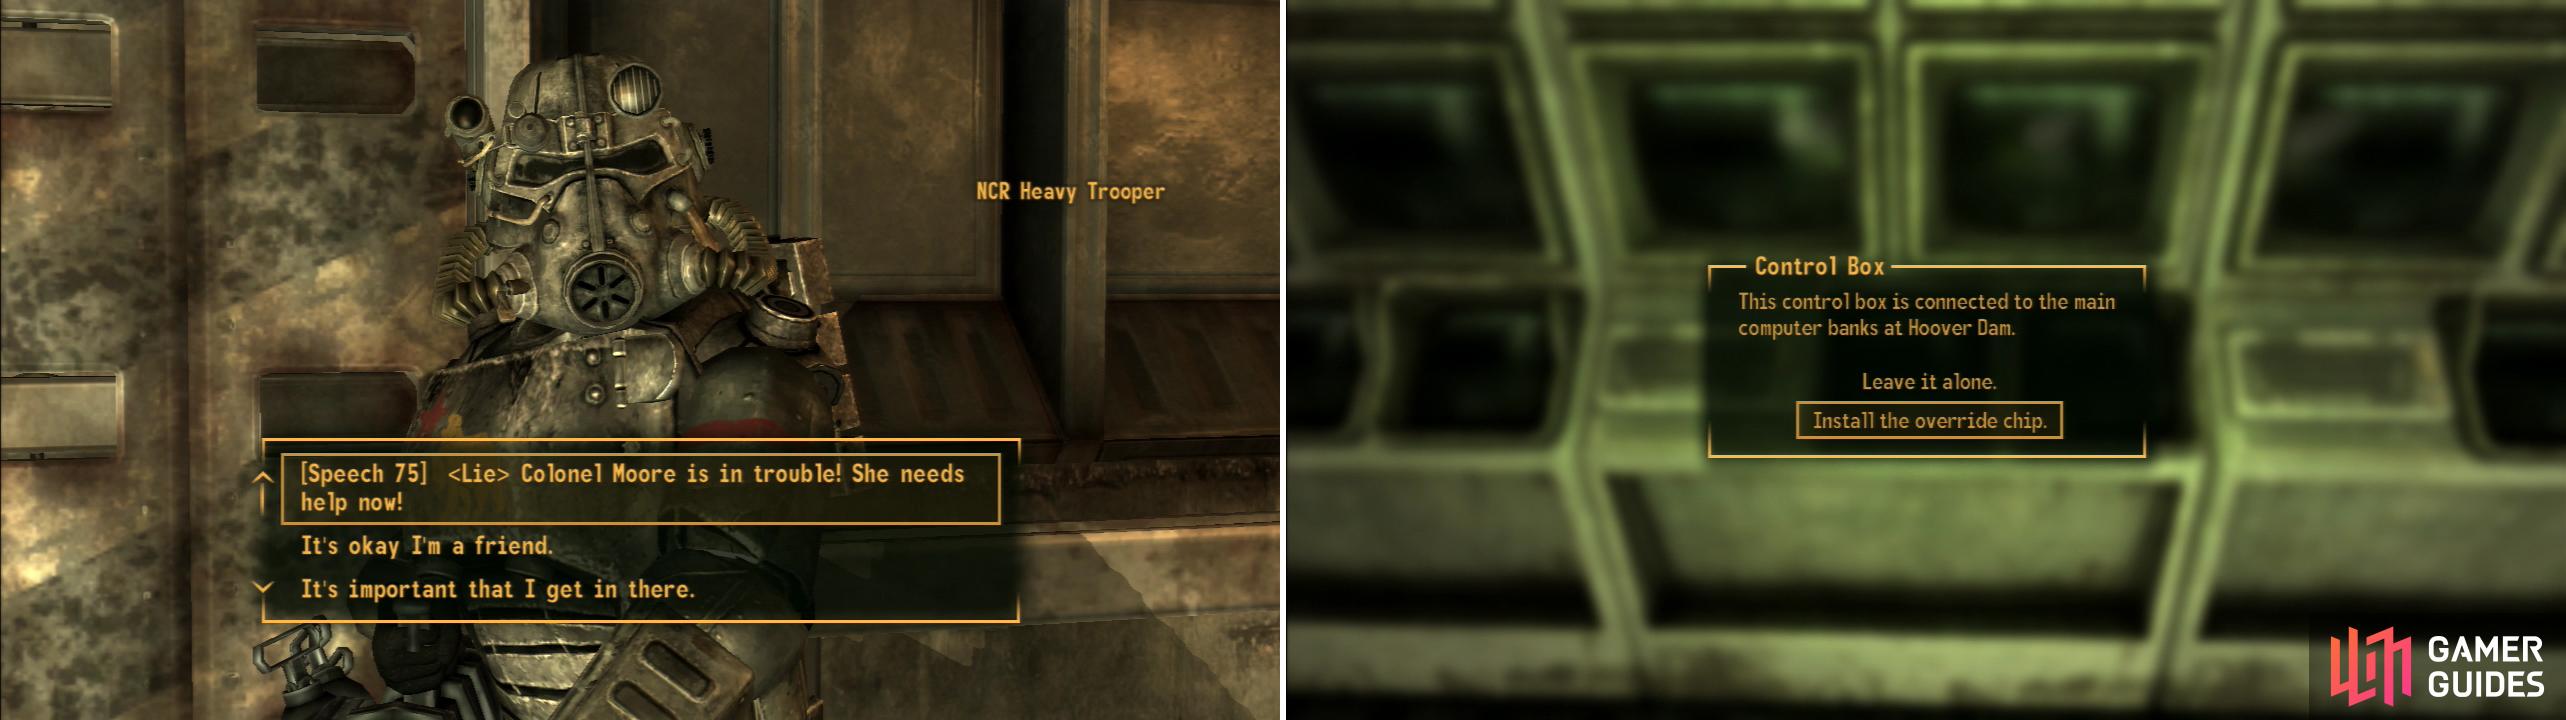 Use force or trickery to get past the NCR Heavy Troopers outside the control room (left) then install the Override Chip into the mainframe at the Hoover Dam, as Mr. House request (right).